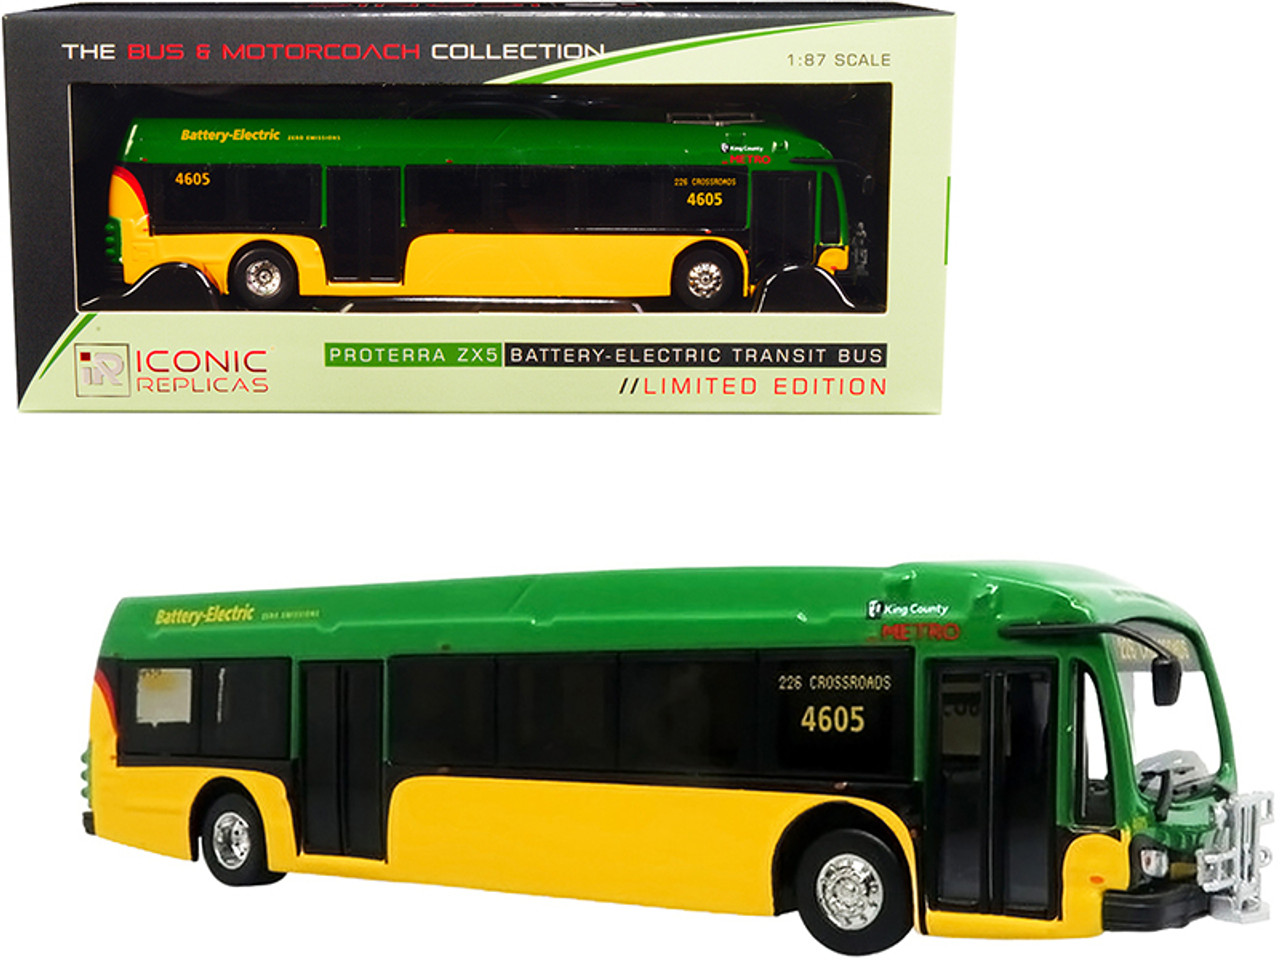 Proterra ZX5 Battery-Electric Transit Bus #226 "Crossroads" Seattle King County (Washington) Green and Yellow "The Bus & Motorcoach Collection" 1/87 (HO) Diecast Model by Iconic Replicas